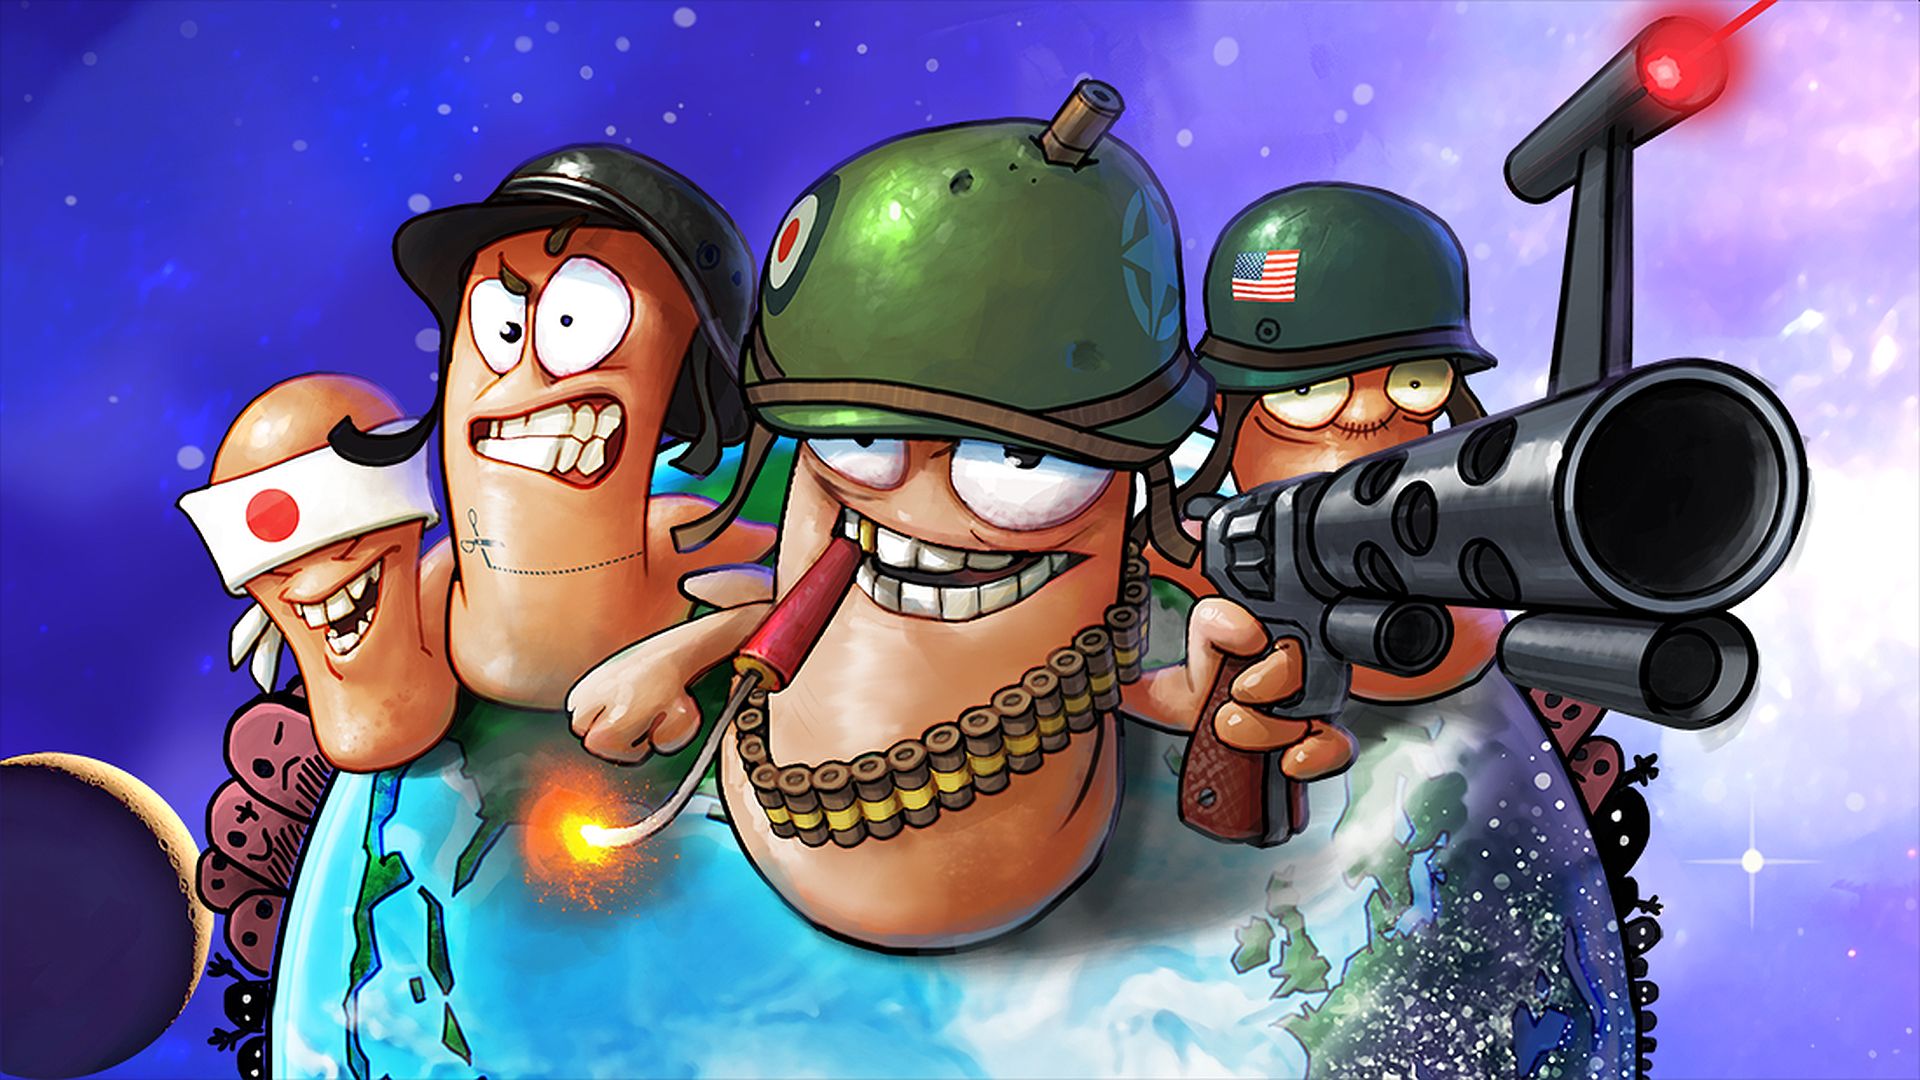 Image of the popular game Worms by Team17 who planned to launch NFT Metaworms